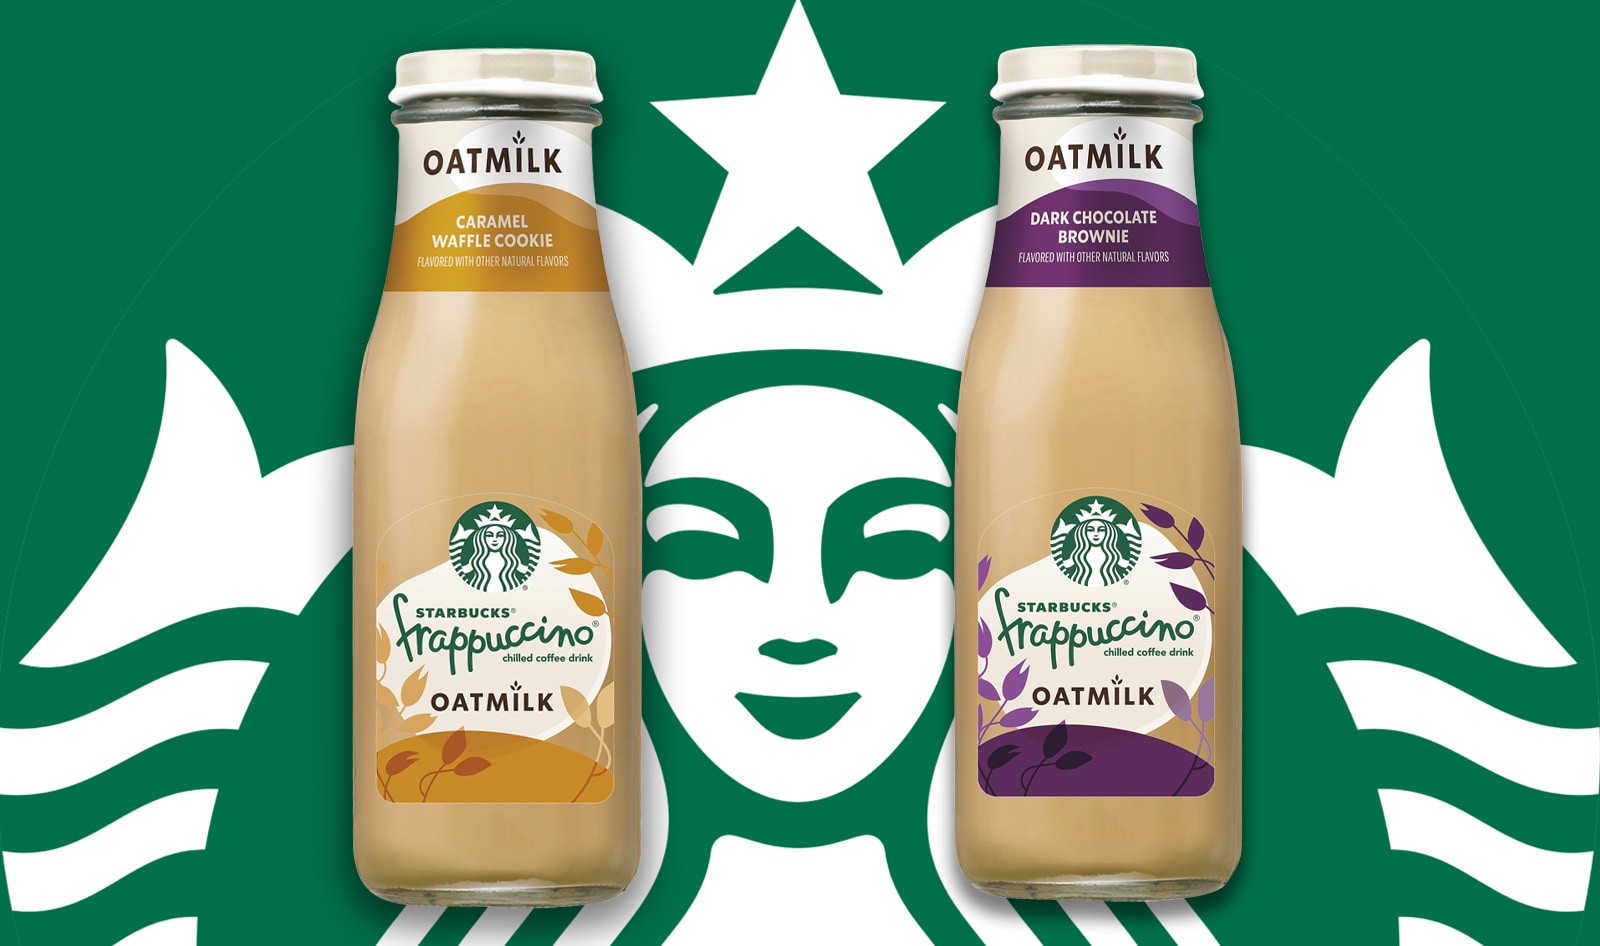 RECALL: Starbucks Vanilla Frappuccino bottles recalled due to possibly  containing glass - MyParisTexas